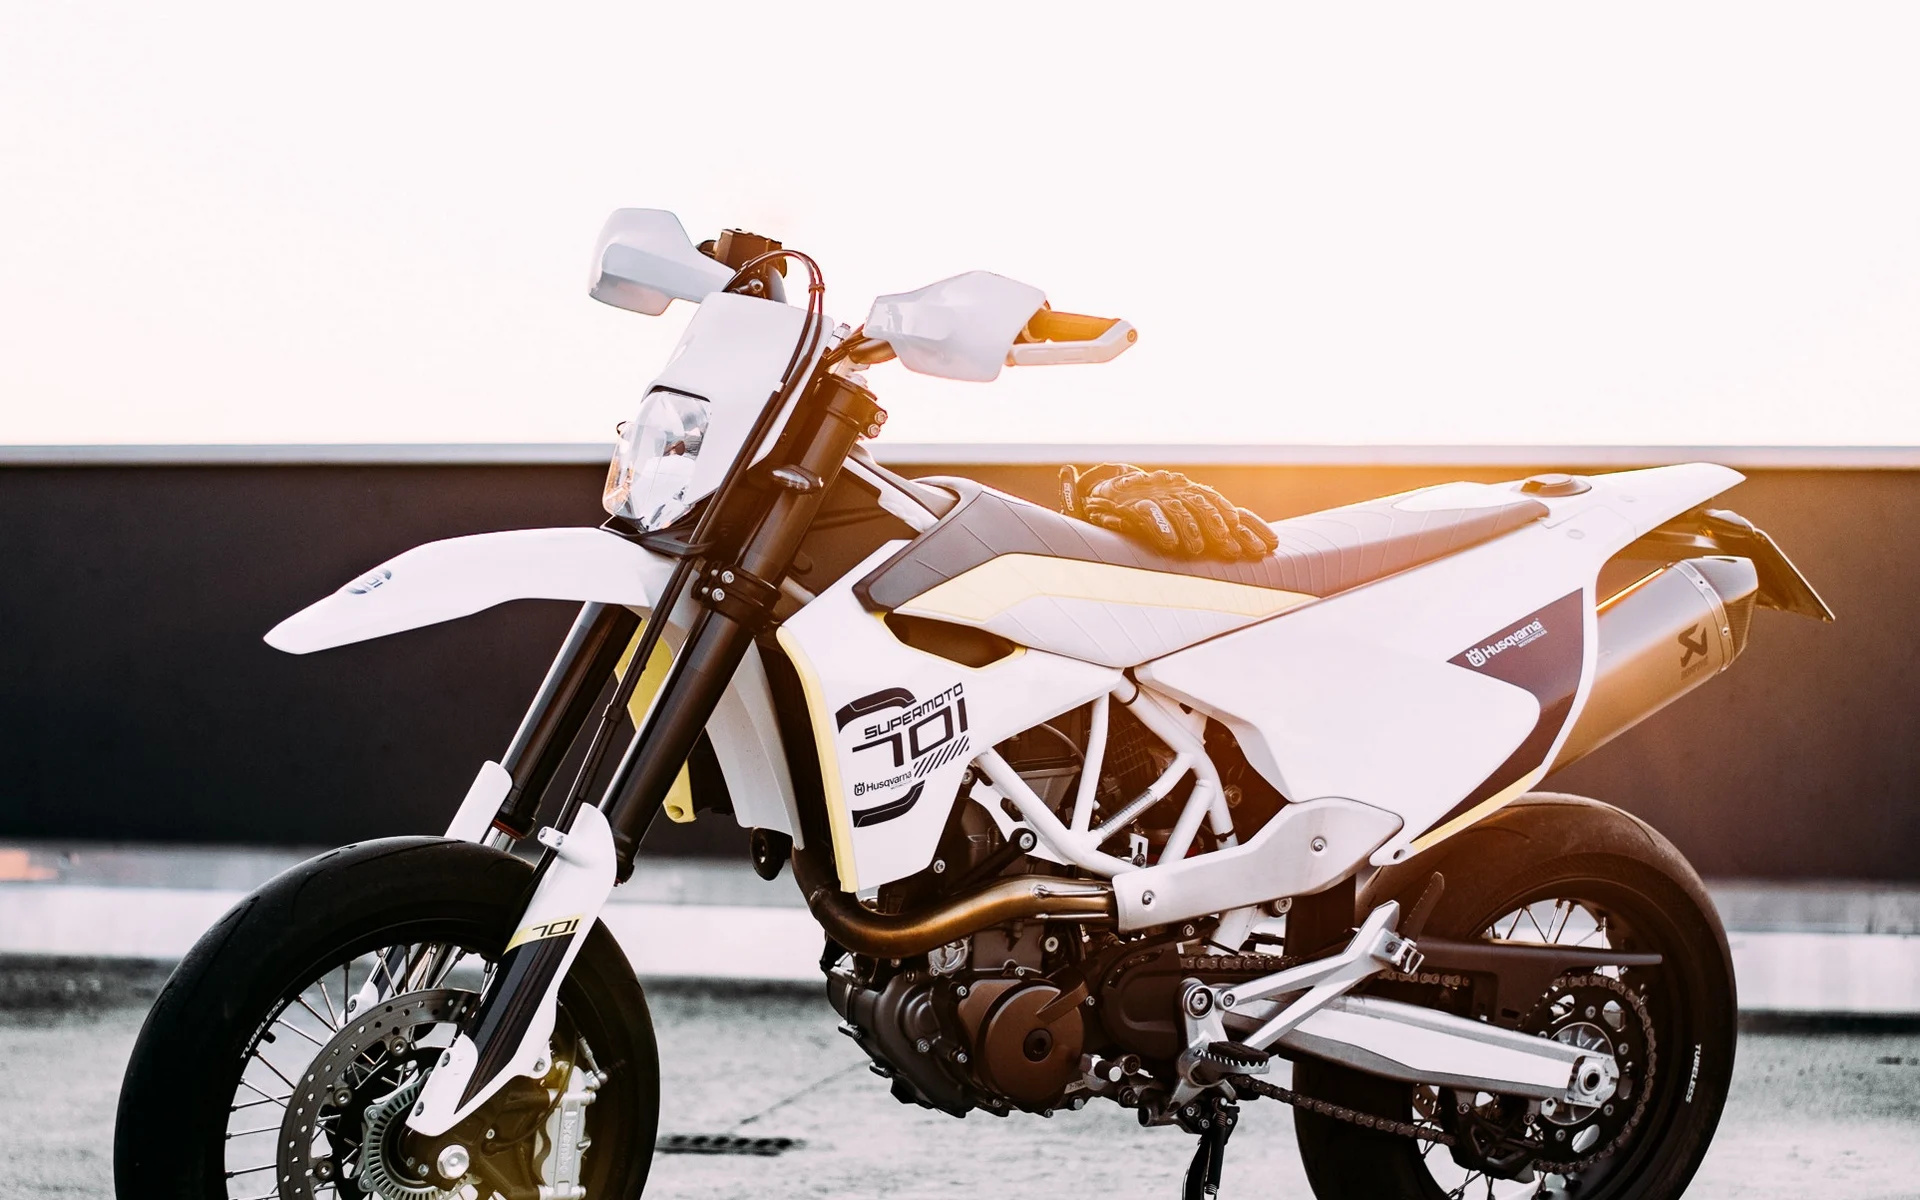 Supermoto: Compact high-tech engine, A state-of-the-art chassis, Unrivalled dual-sport ability. 1920x1200 HD Wallpaper.